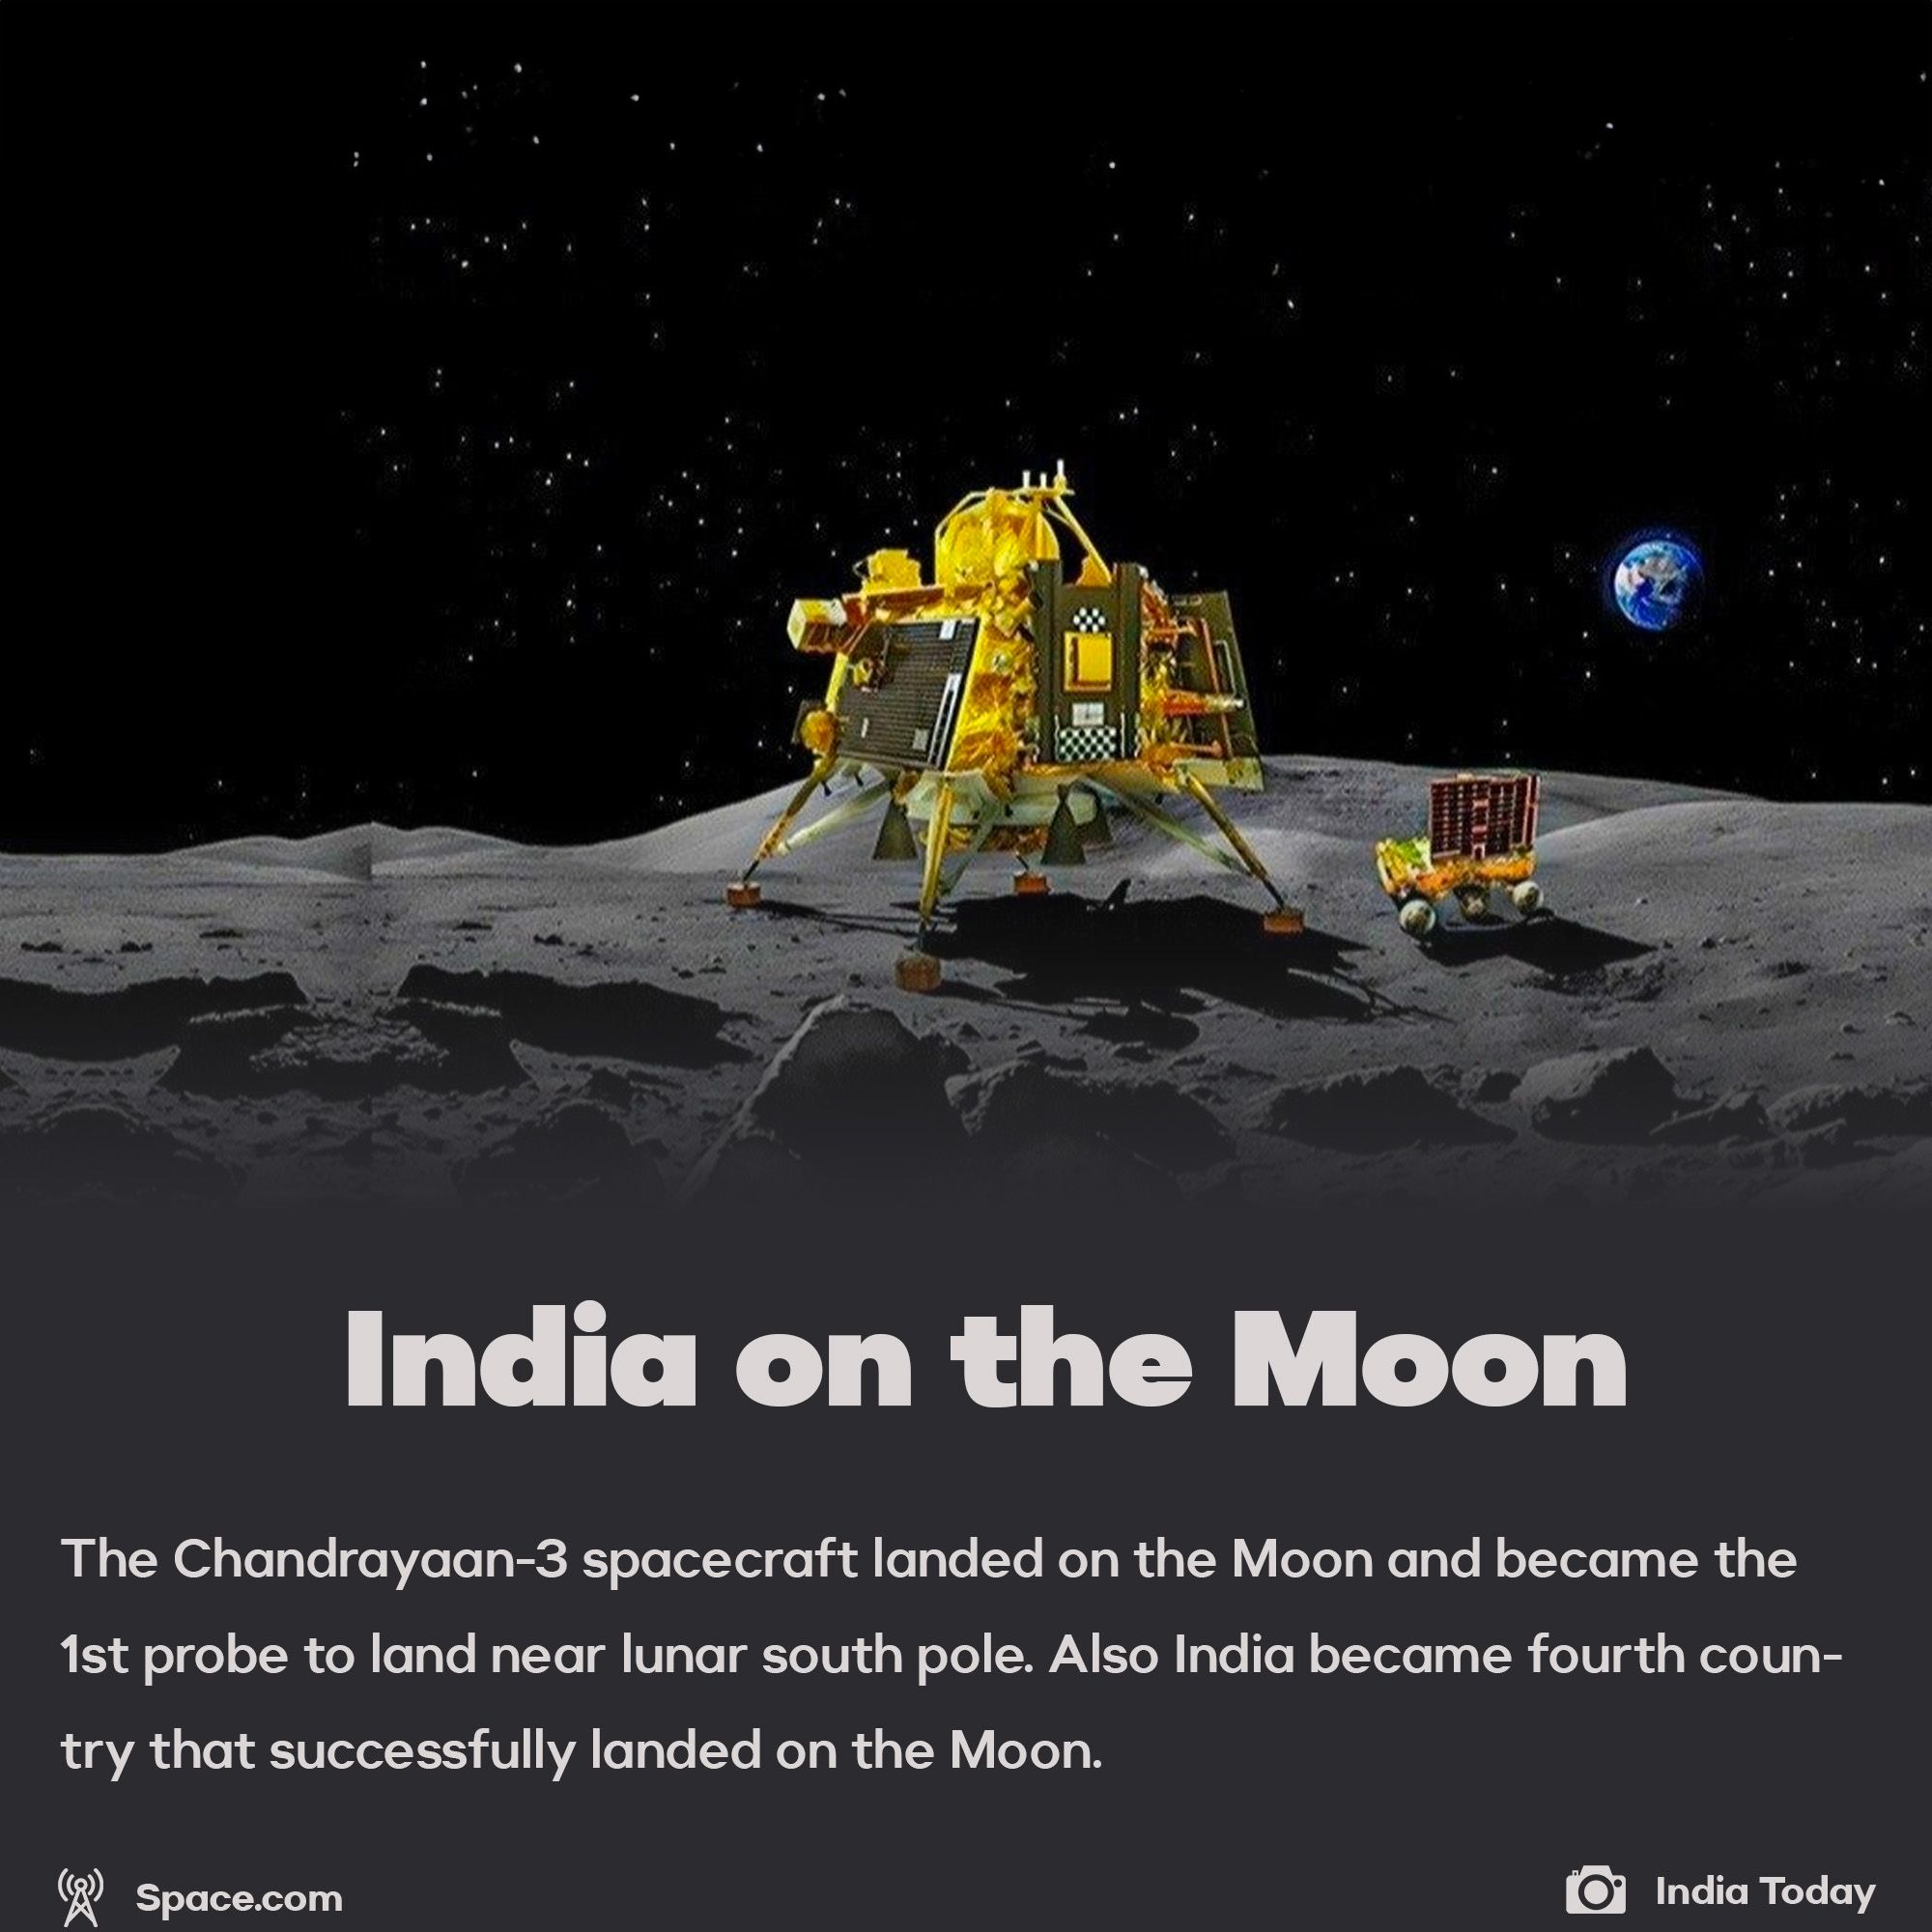 India on the Moon